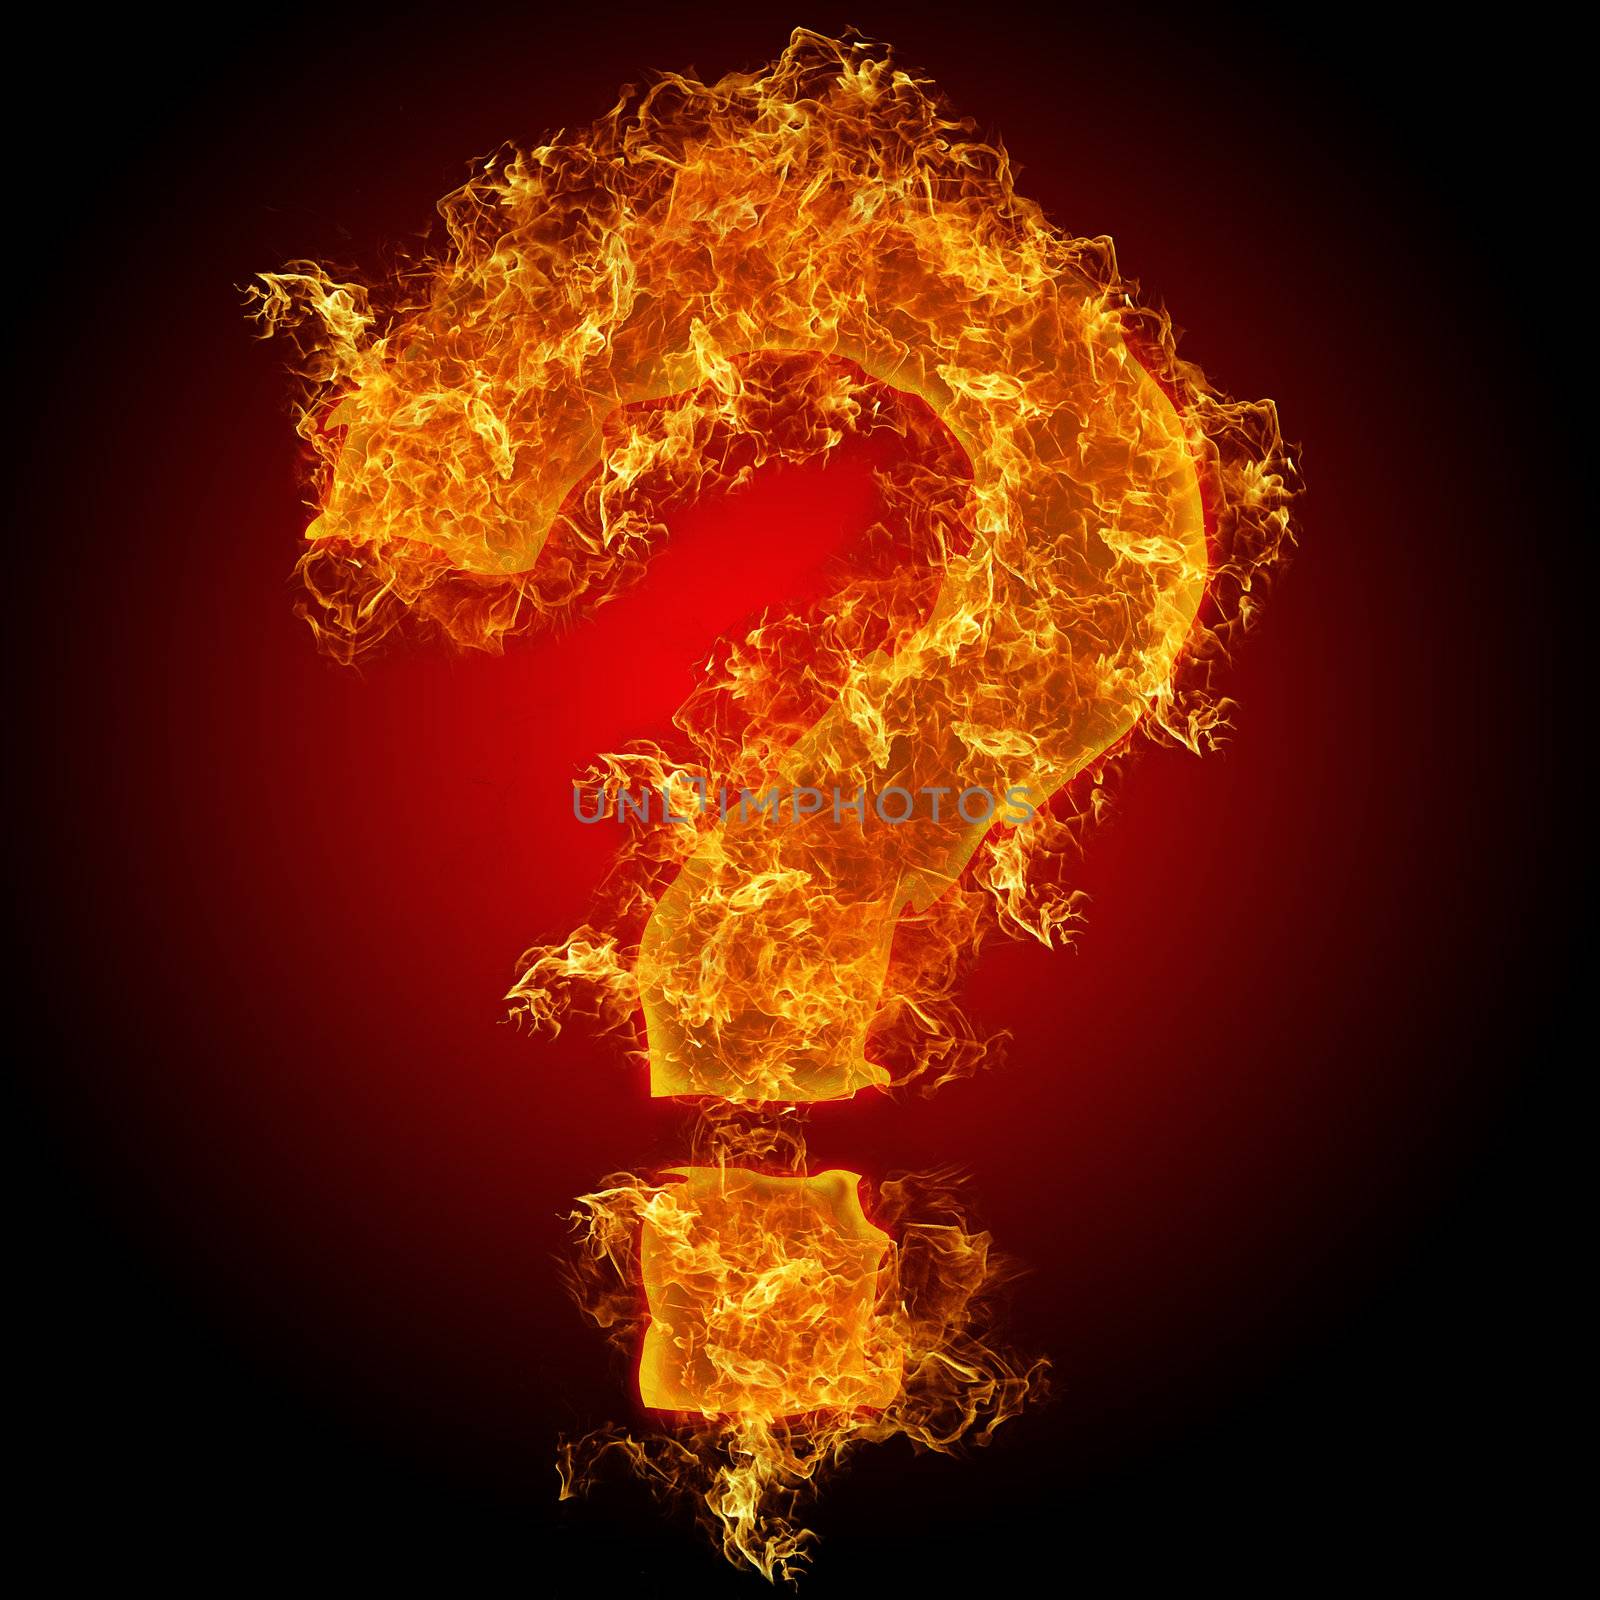 Fire sign query mark by rusak